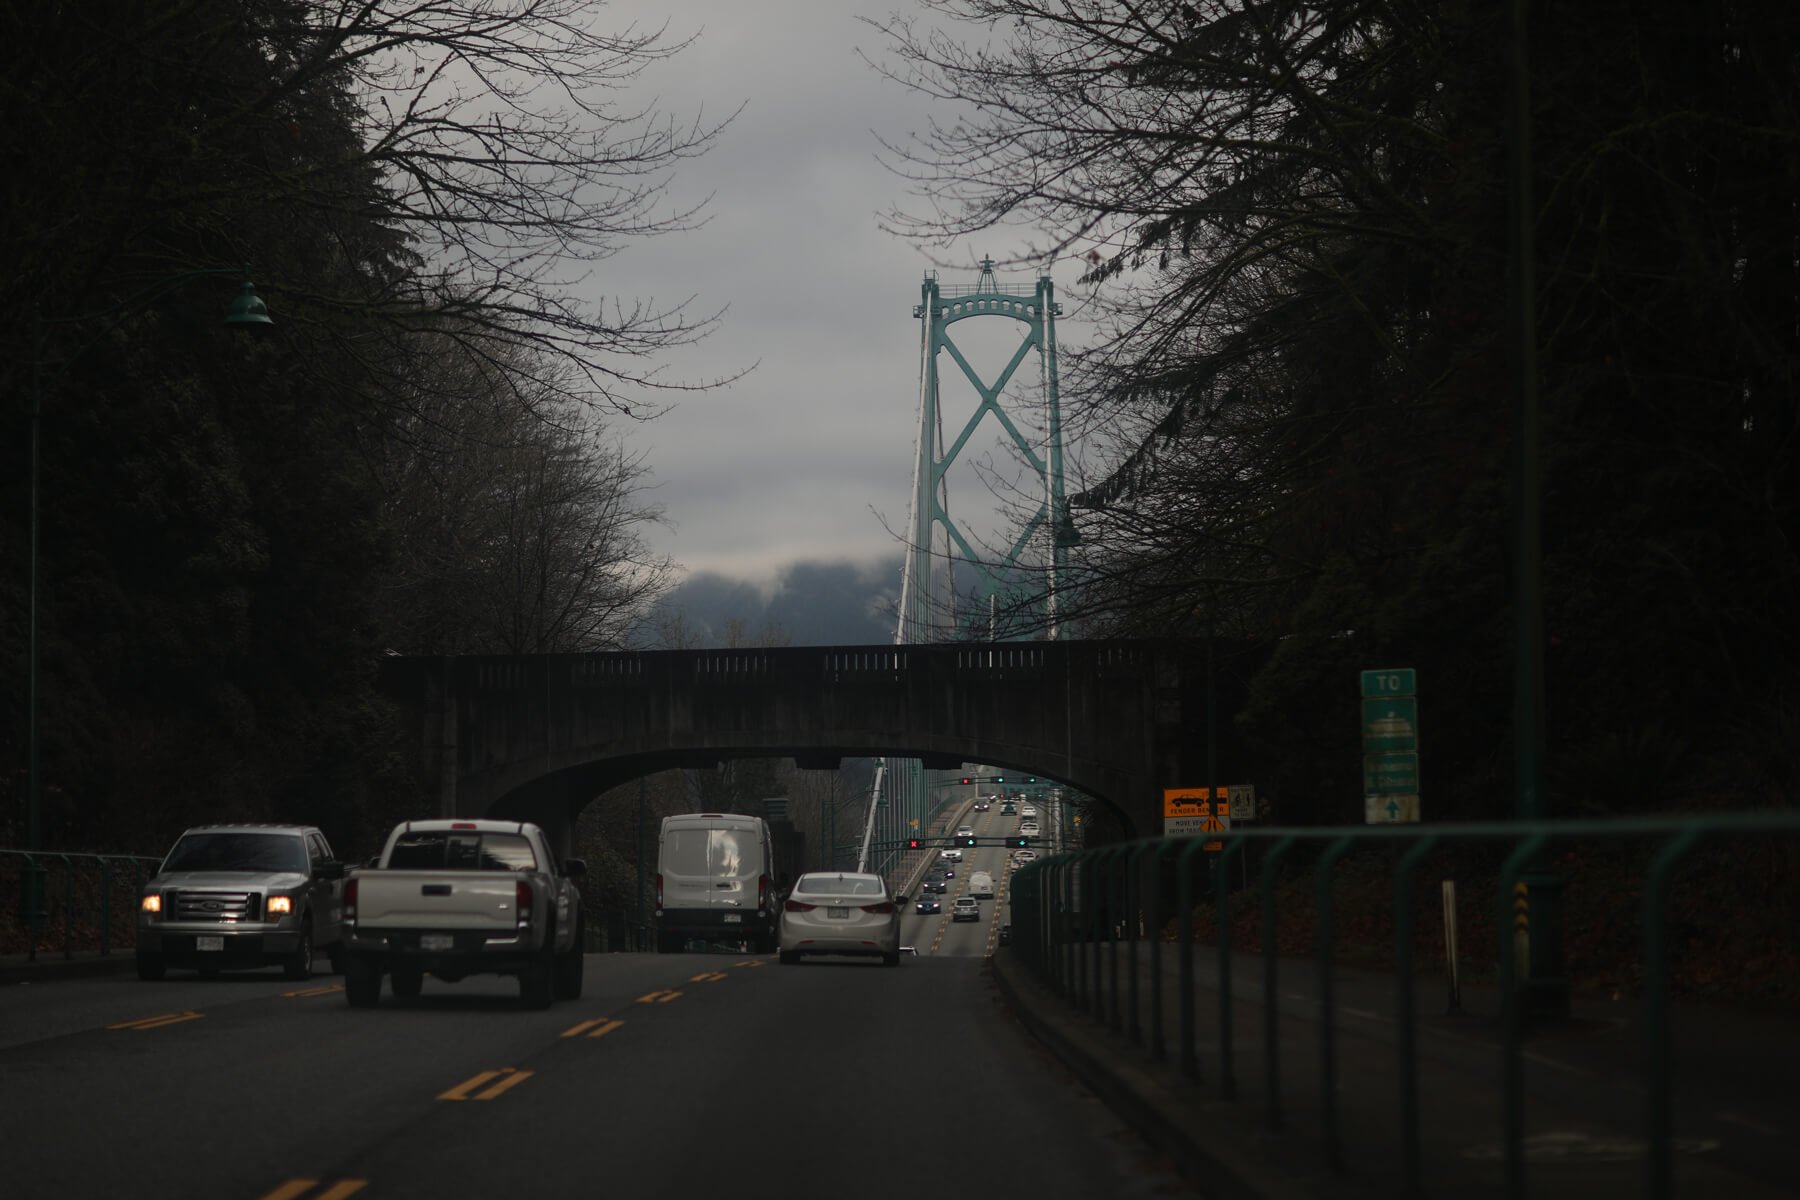 Lions-gate-bridge-in-vancouver-bc-day-trip-from-seattle